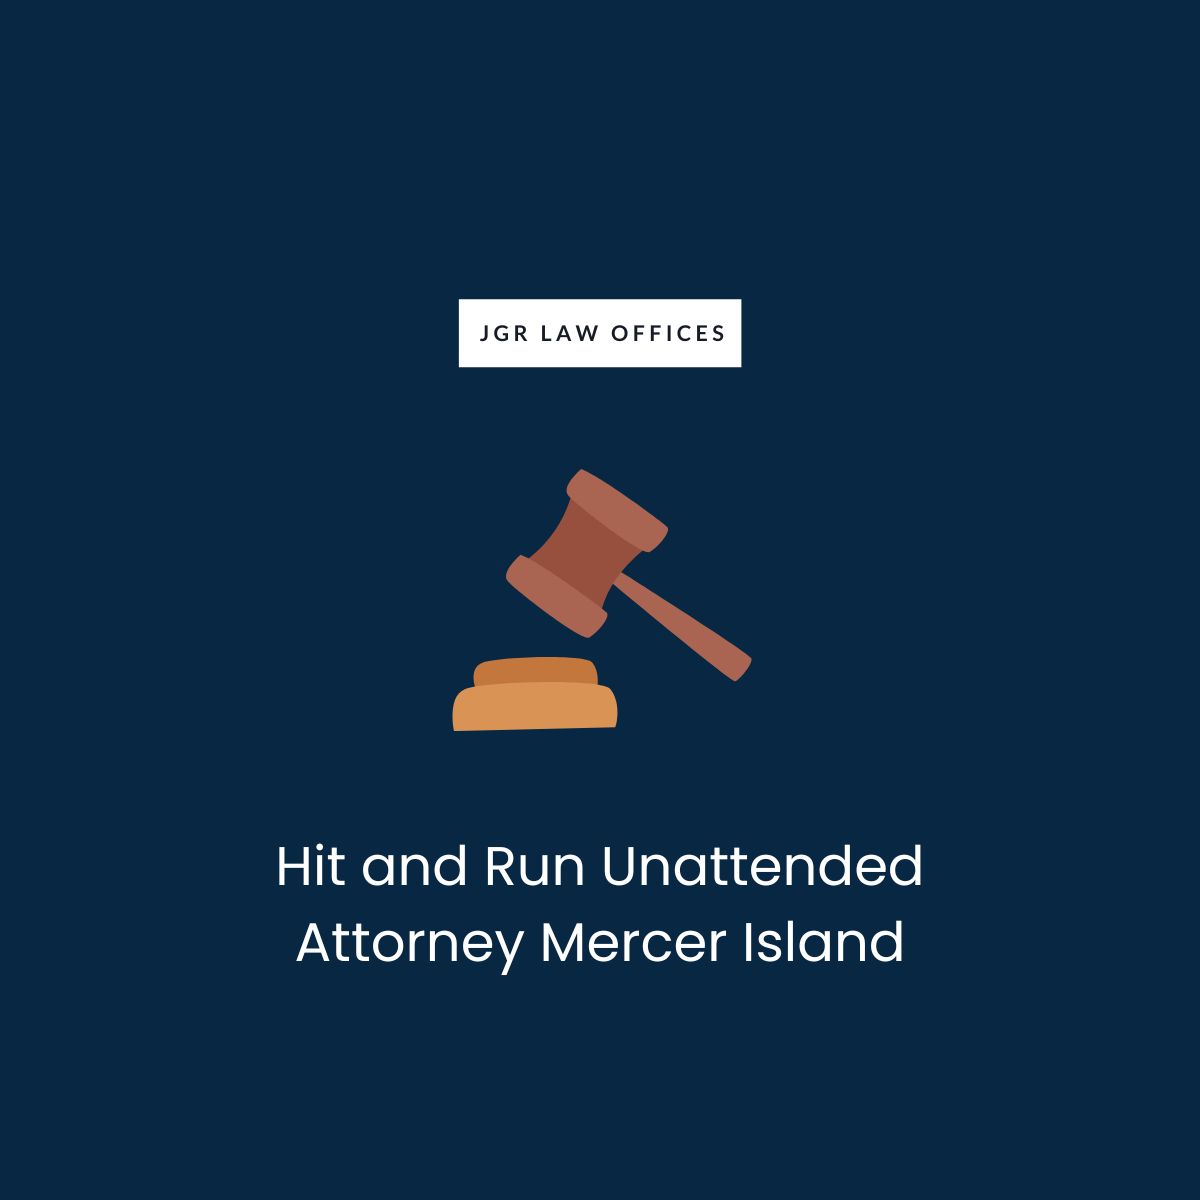 Hit and Run Unattended Attorney Mercer Island